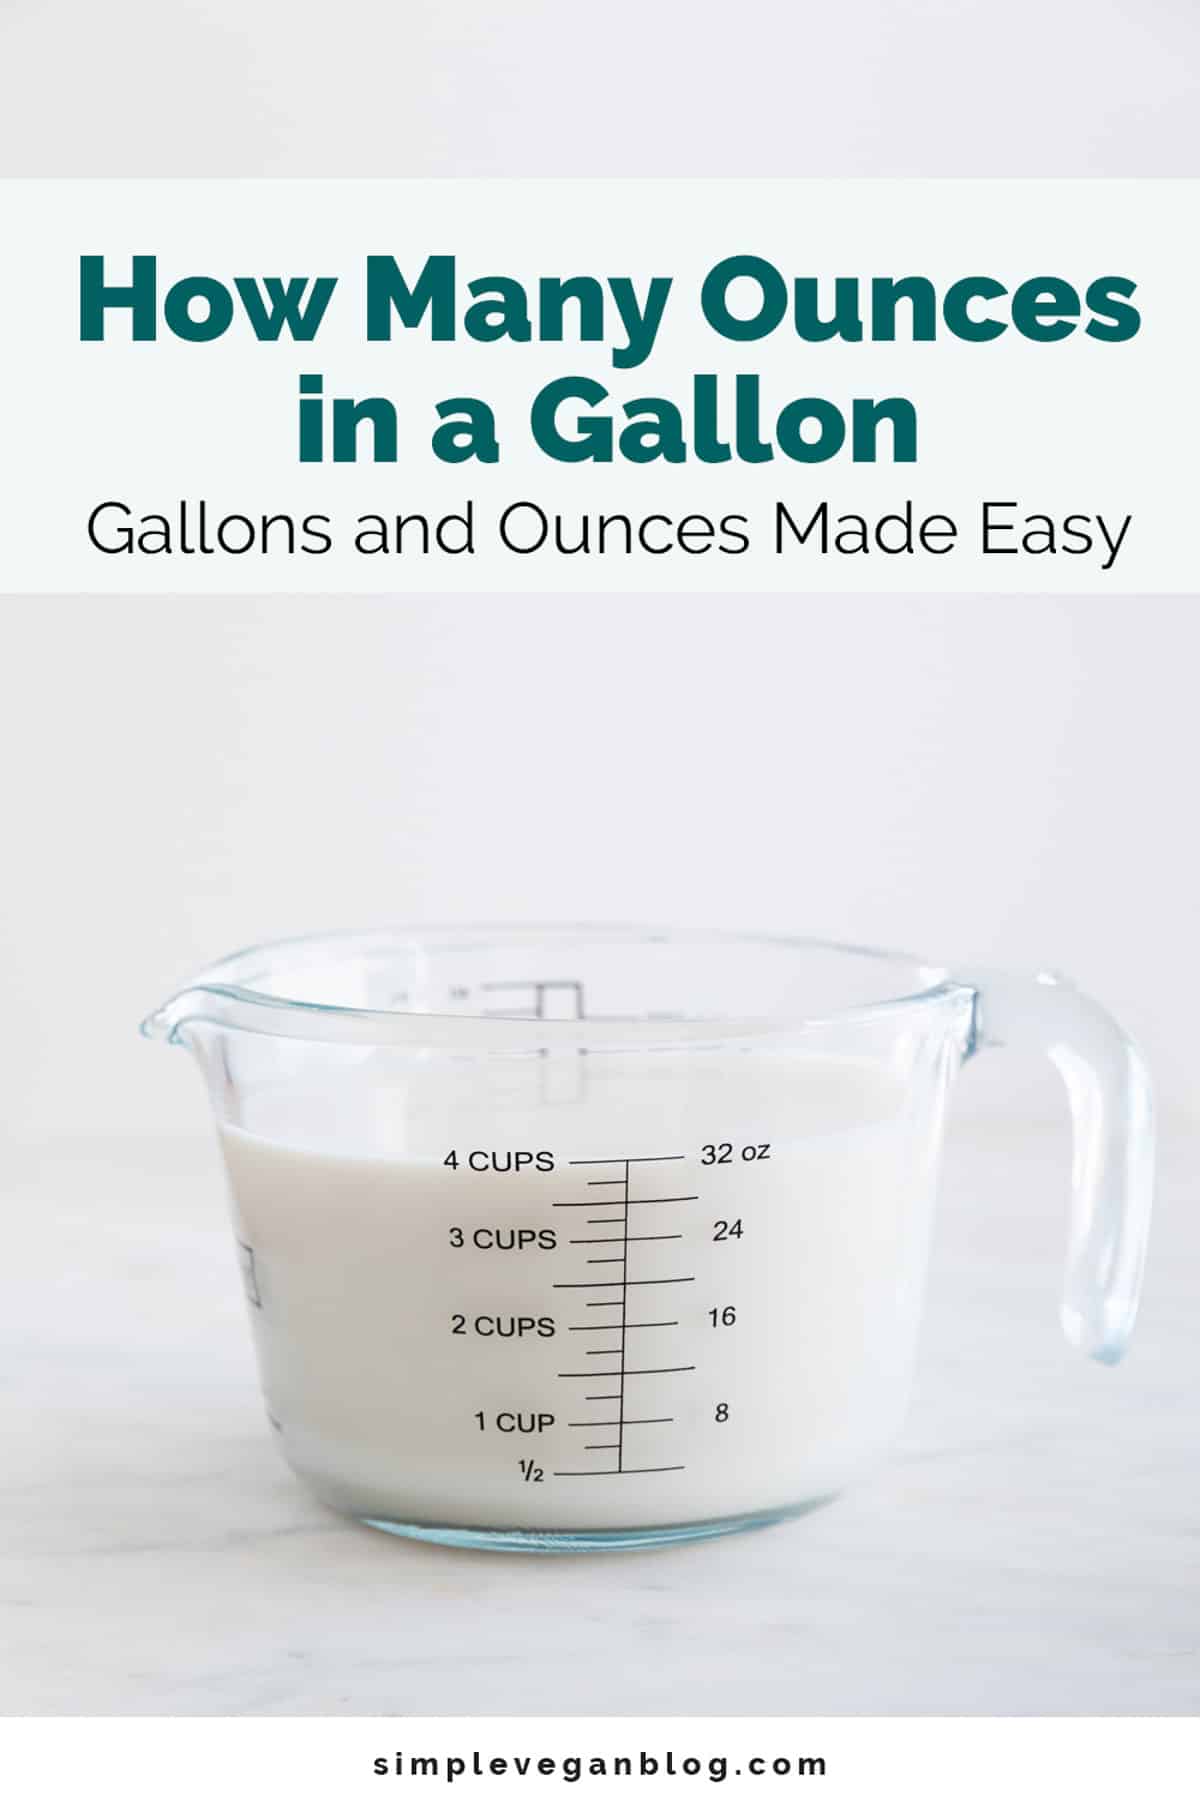 https://simpleveganblog.com/wp-content/uploads/2023/03/How-Many-Ounces-in-a-Gallon-gal-to-oz.jpg